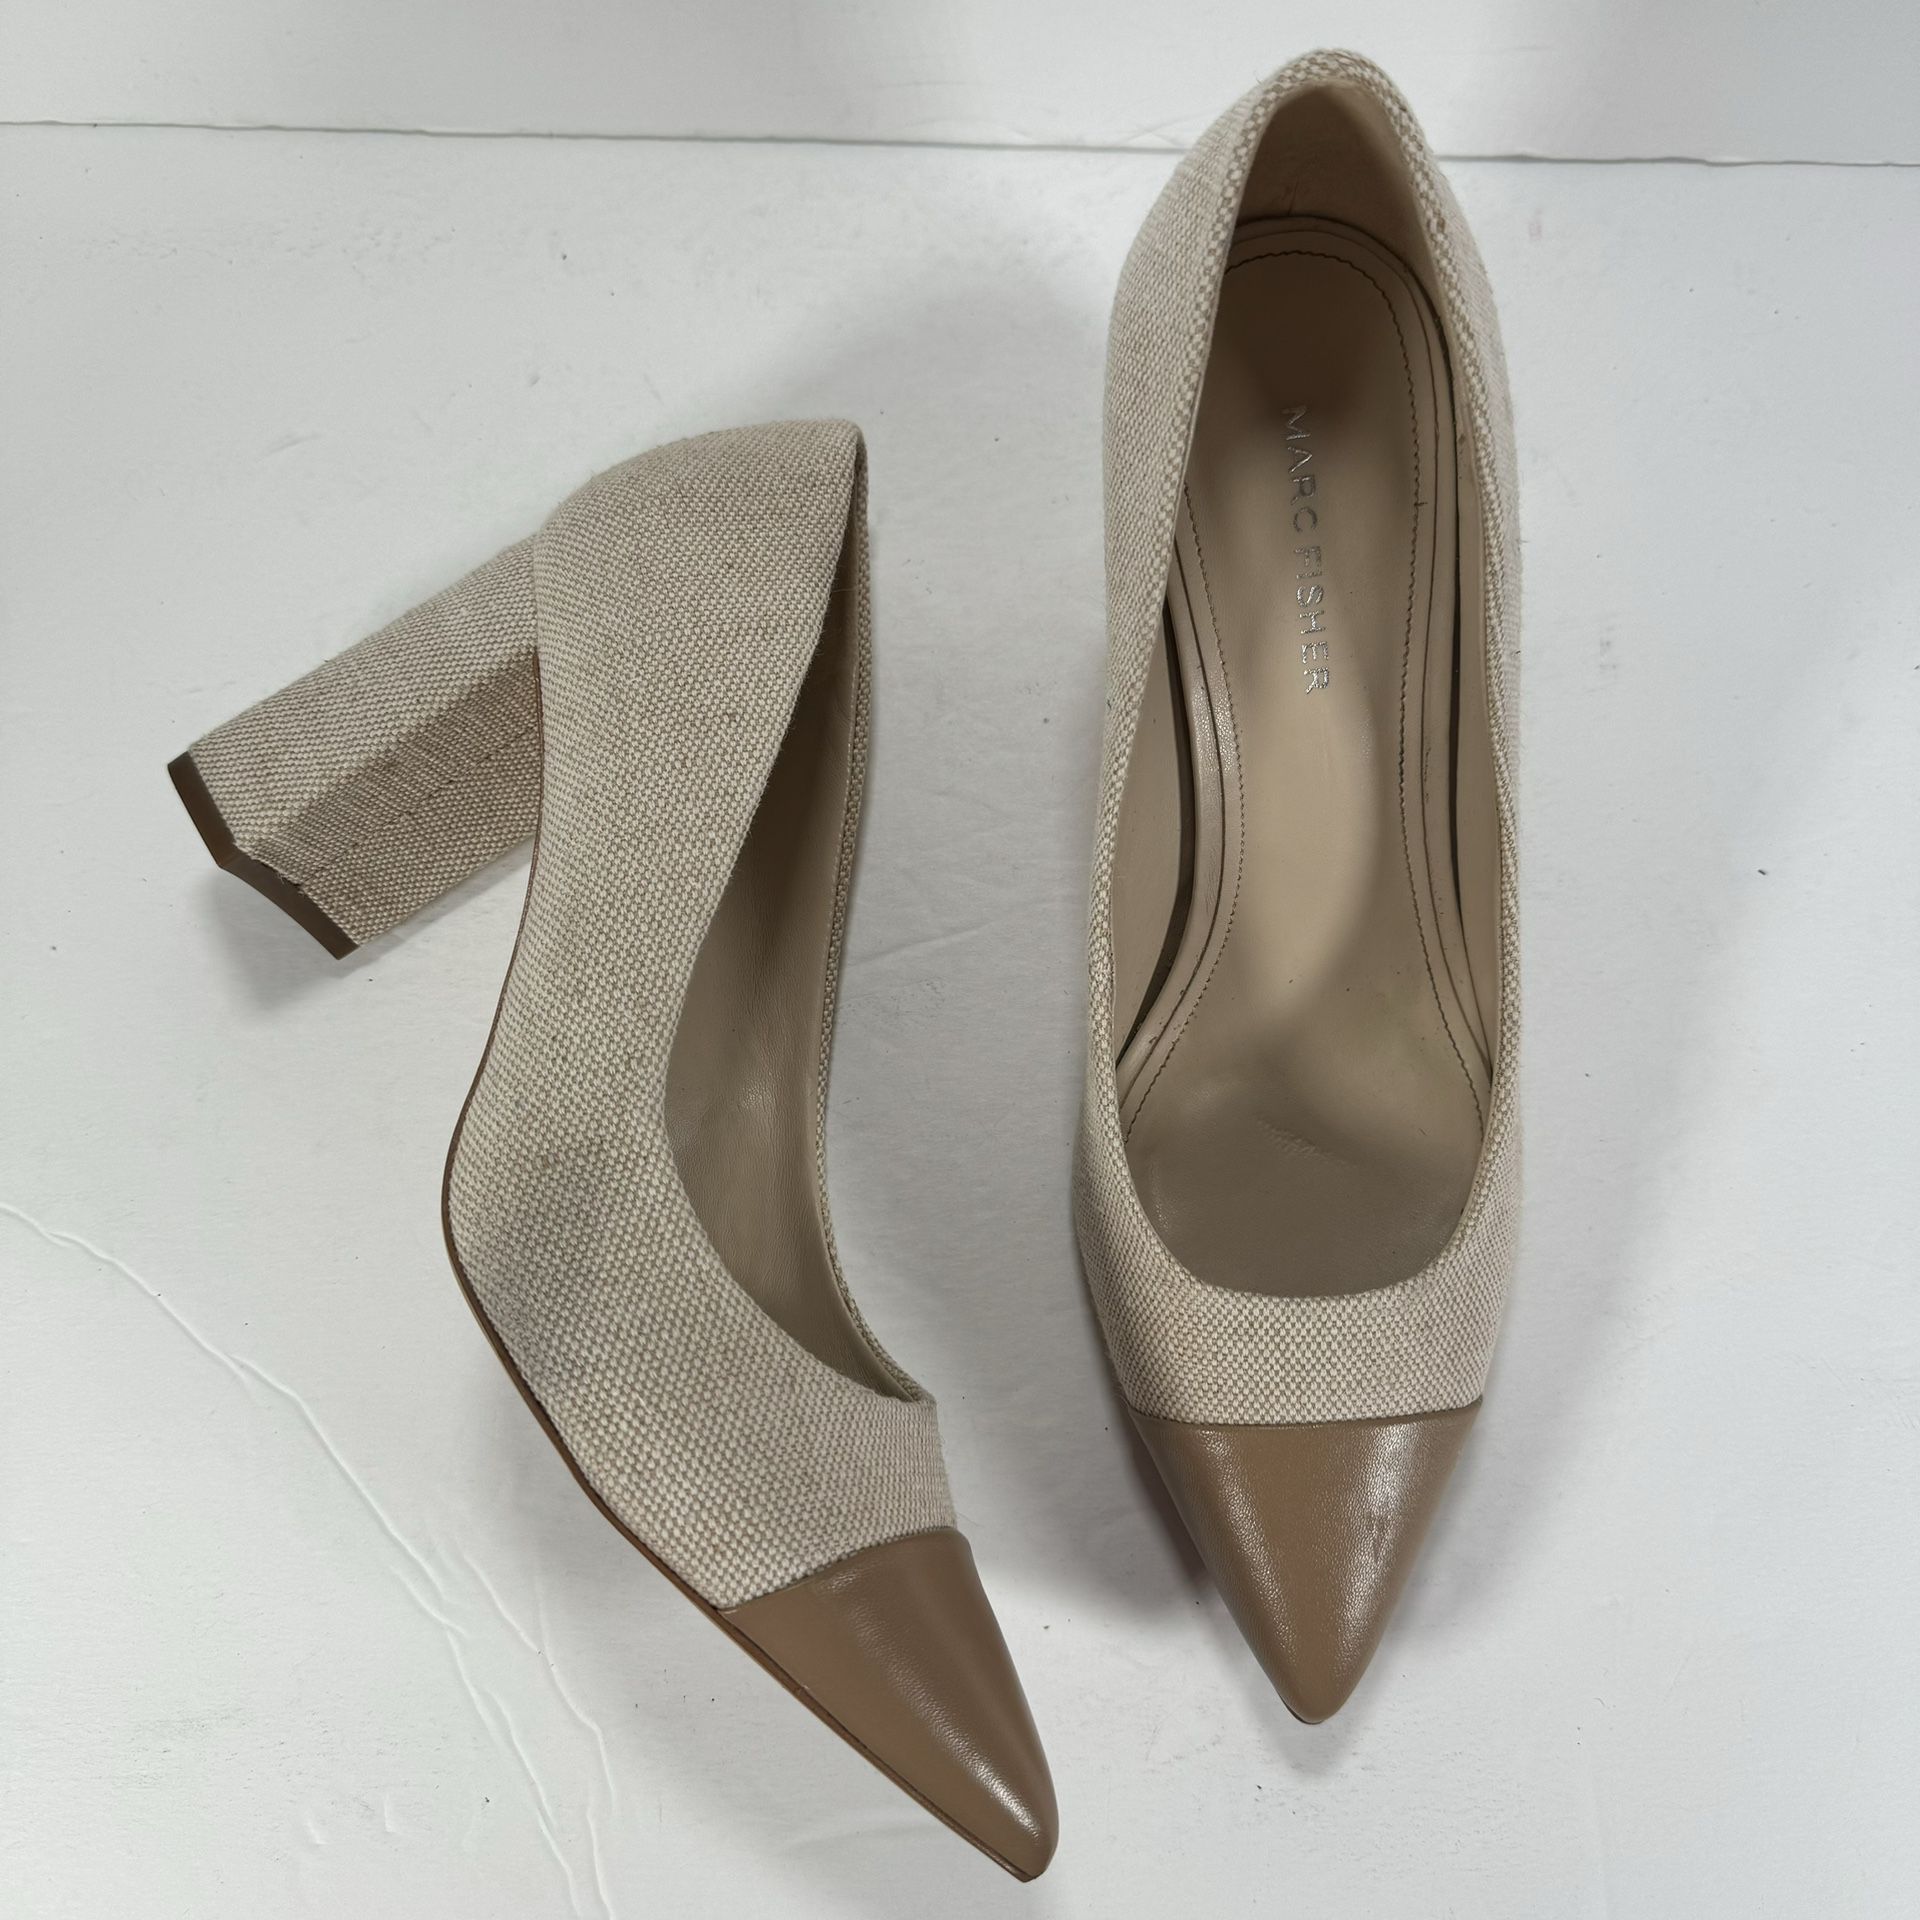 Marc Fisher Velda Natural Multi Fabric Pointed Toe Block Heel Pumps Size 9.5M